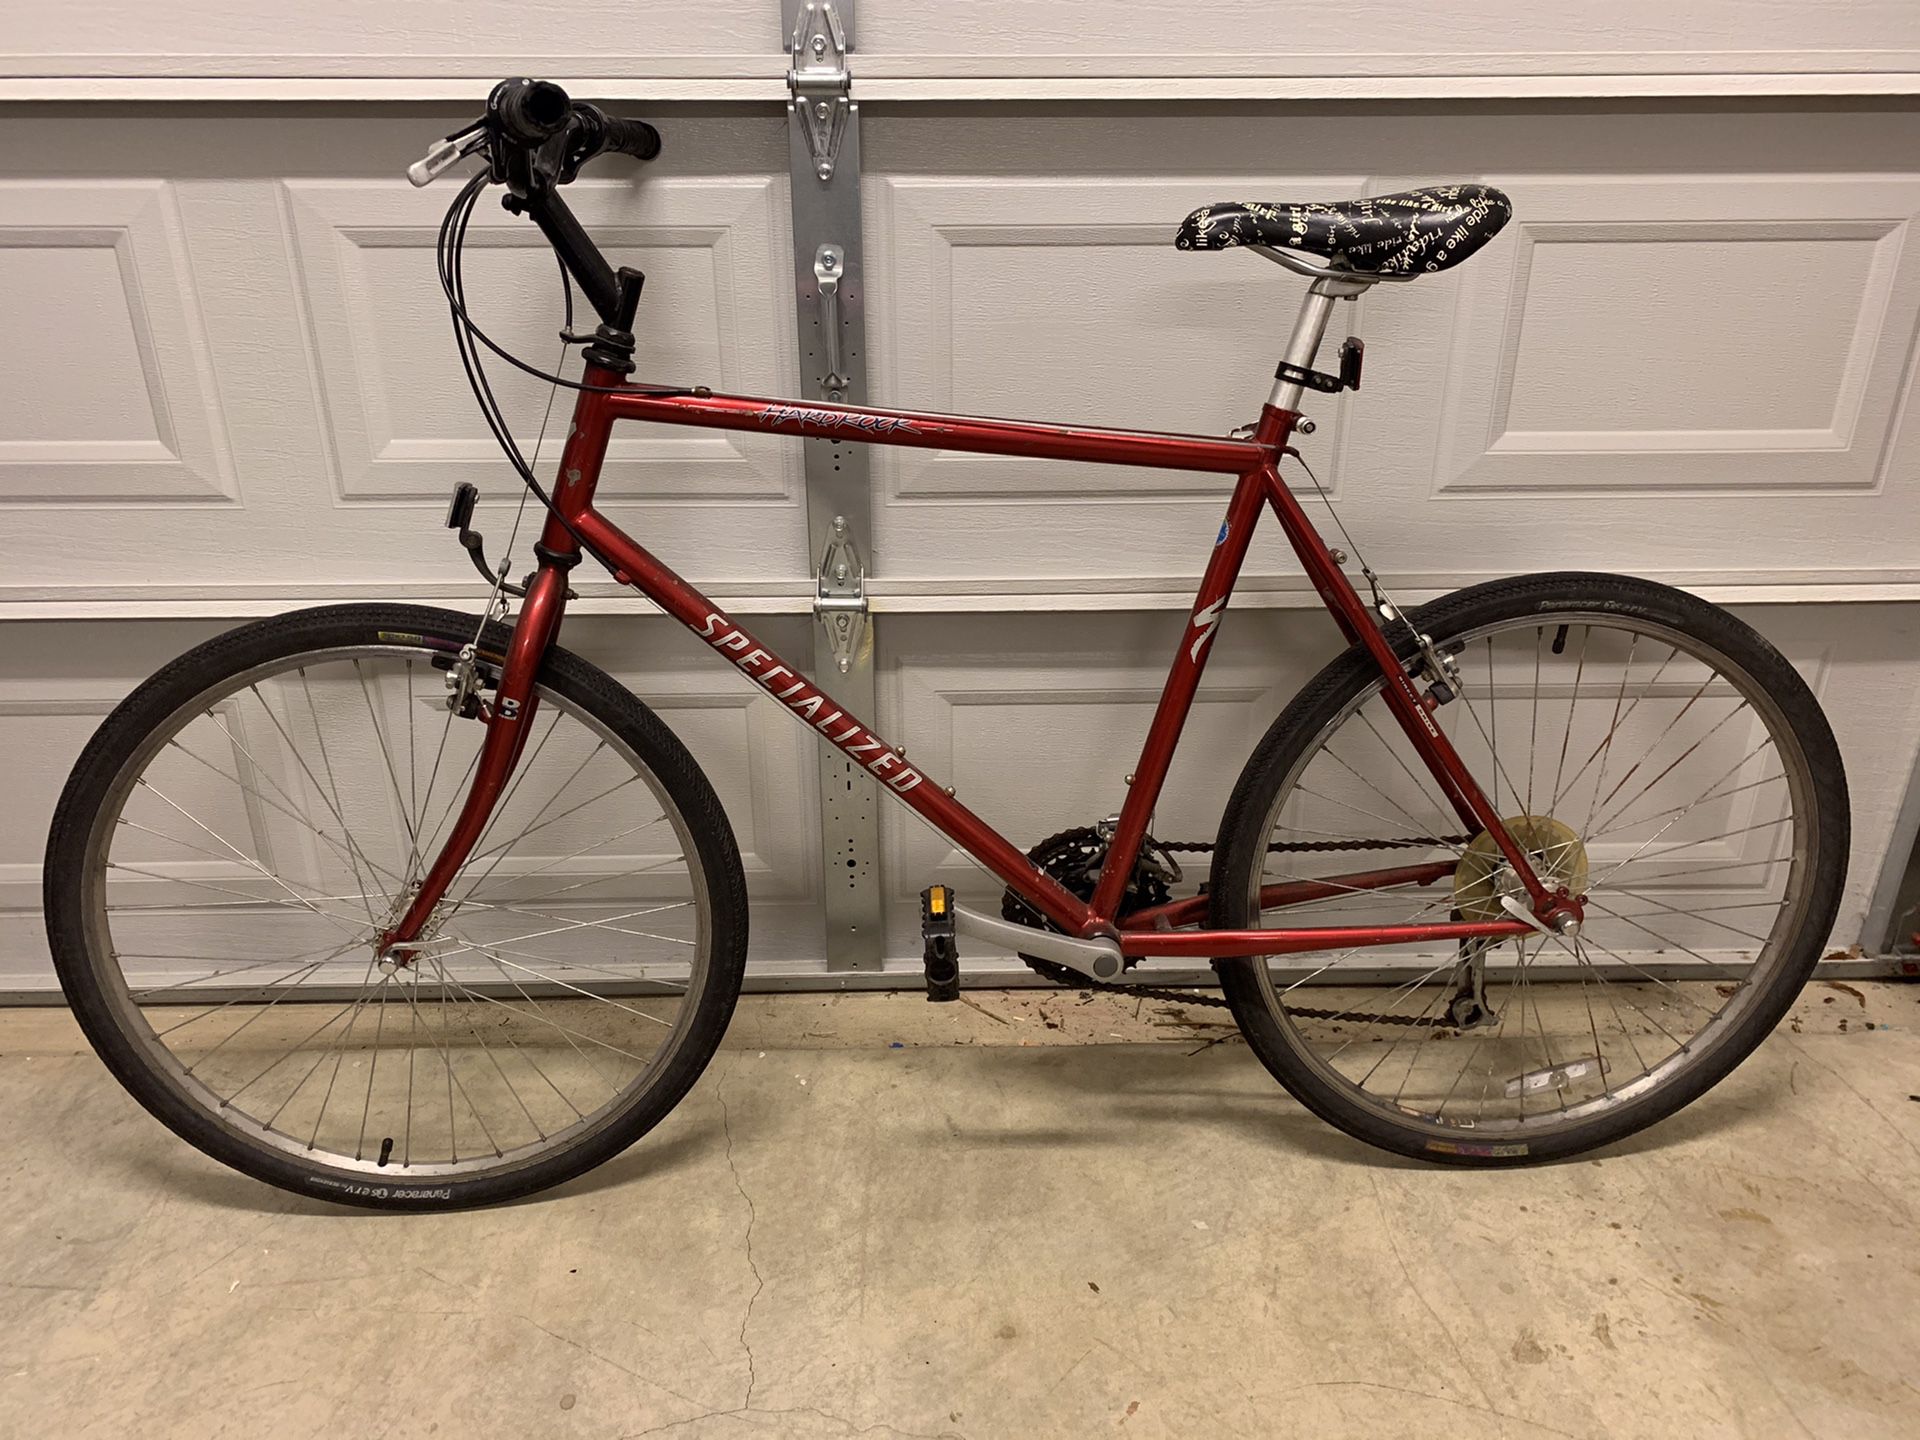 Specialized Hardrock Used Bike in Good Condition Large frame